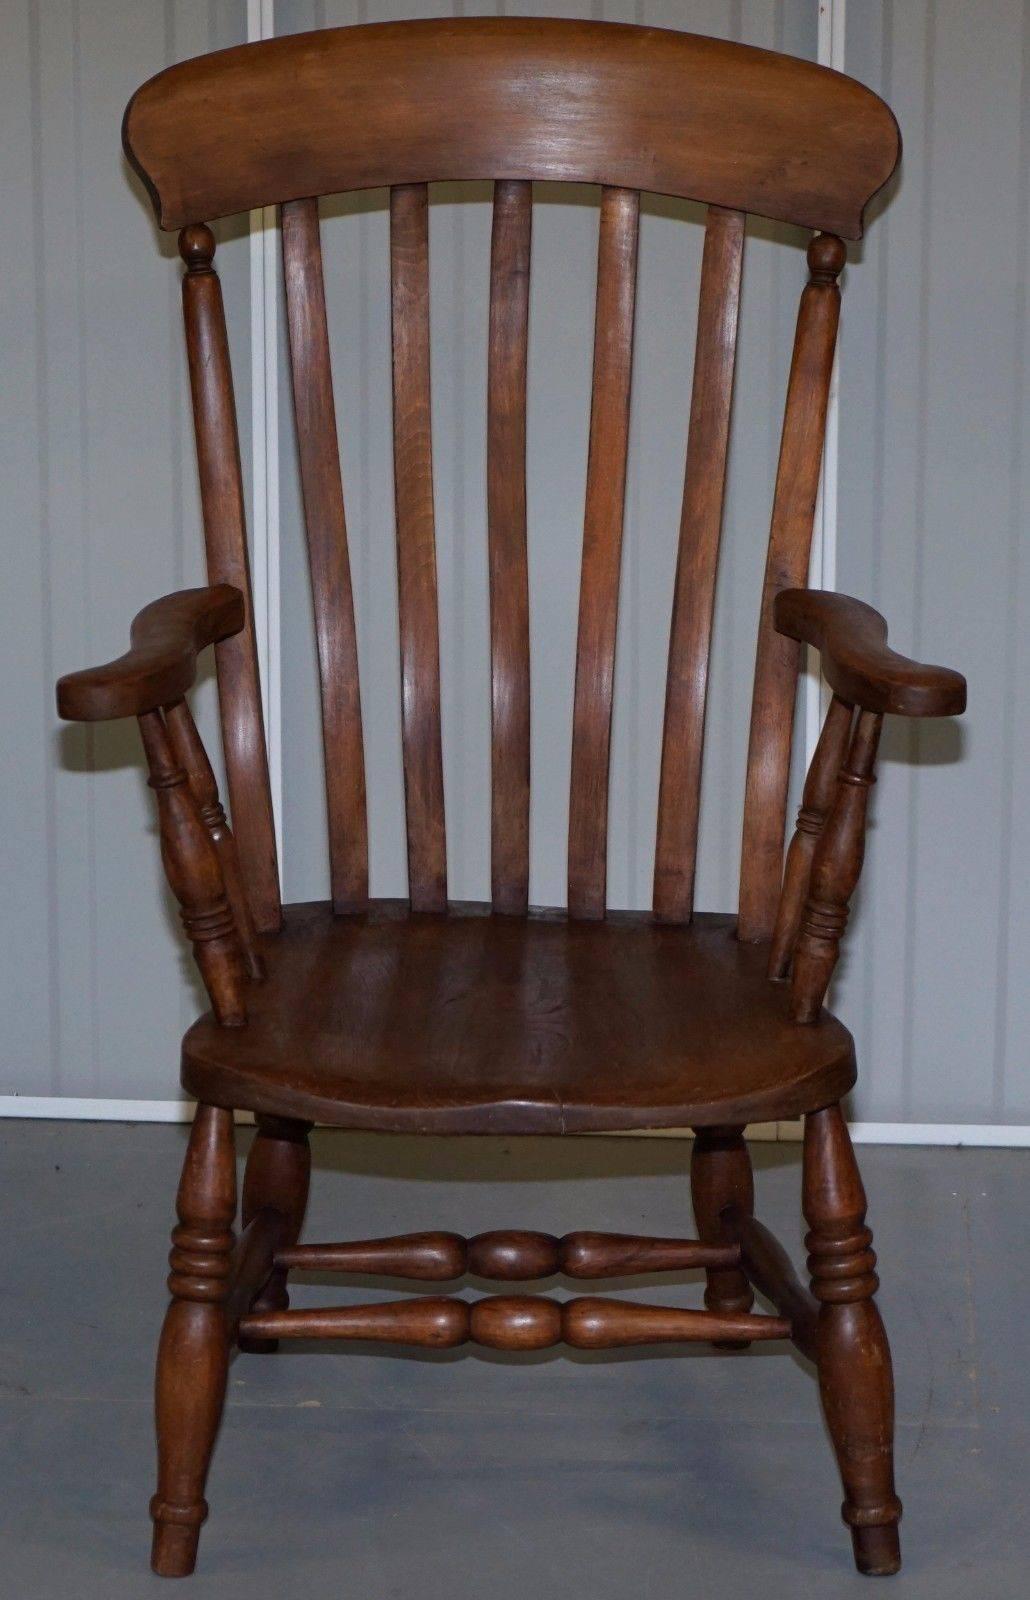 We are delighted to offer for sale lovely rare English Elm Victorian circa 1890 lath stick back chair

A rare survivor in stunning vintage condition, structurally the chair is in excellent order, the seat has a small patina crack at the front of